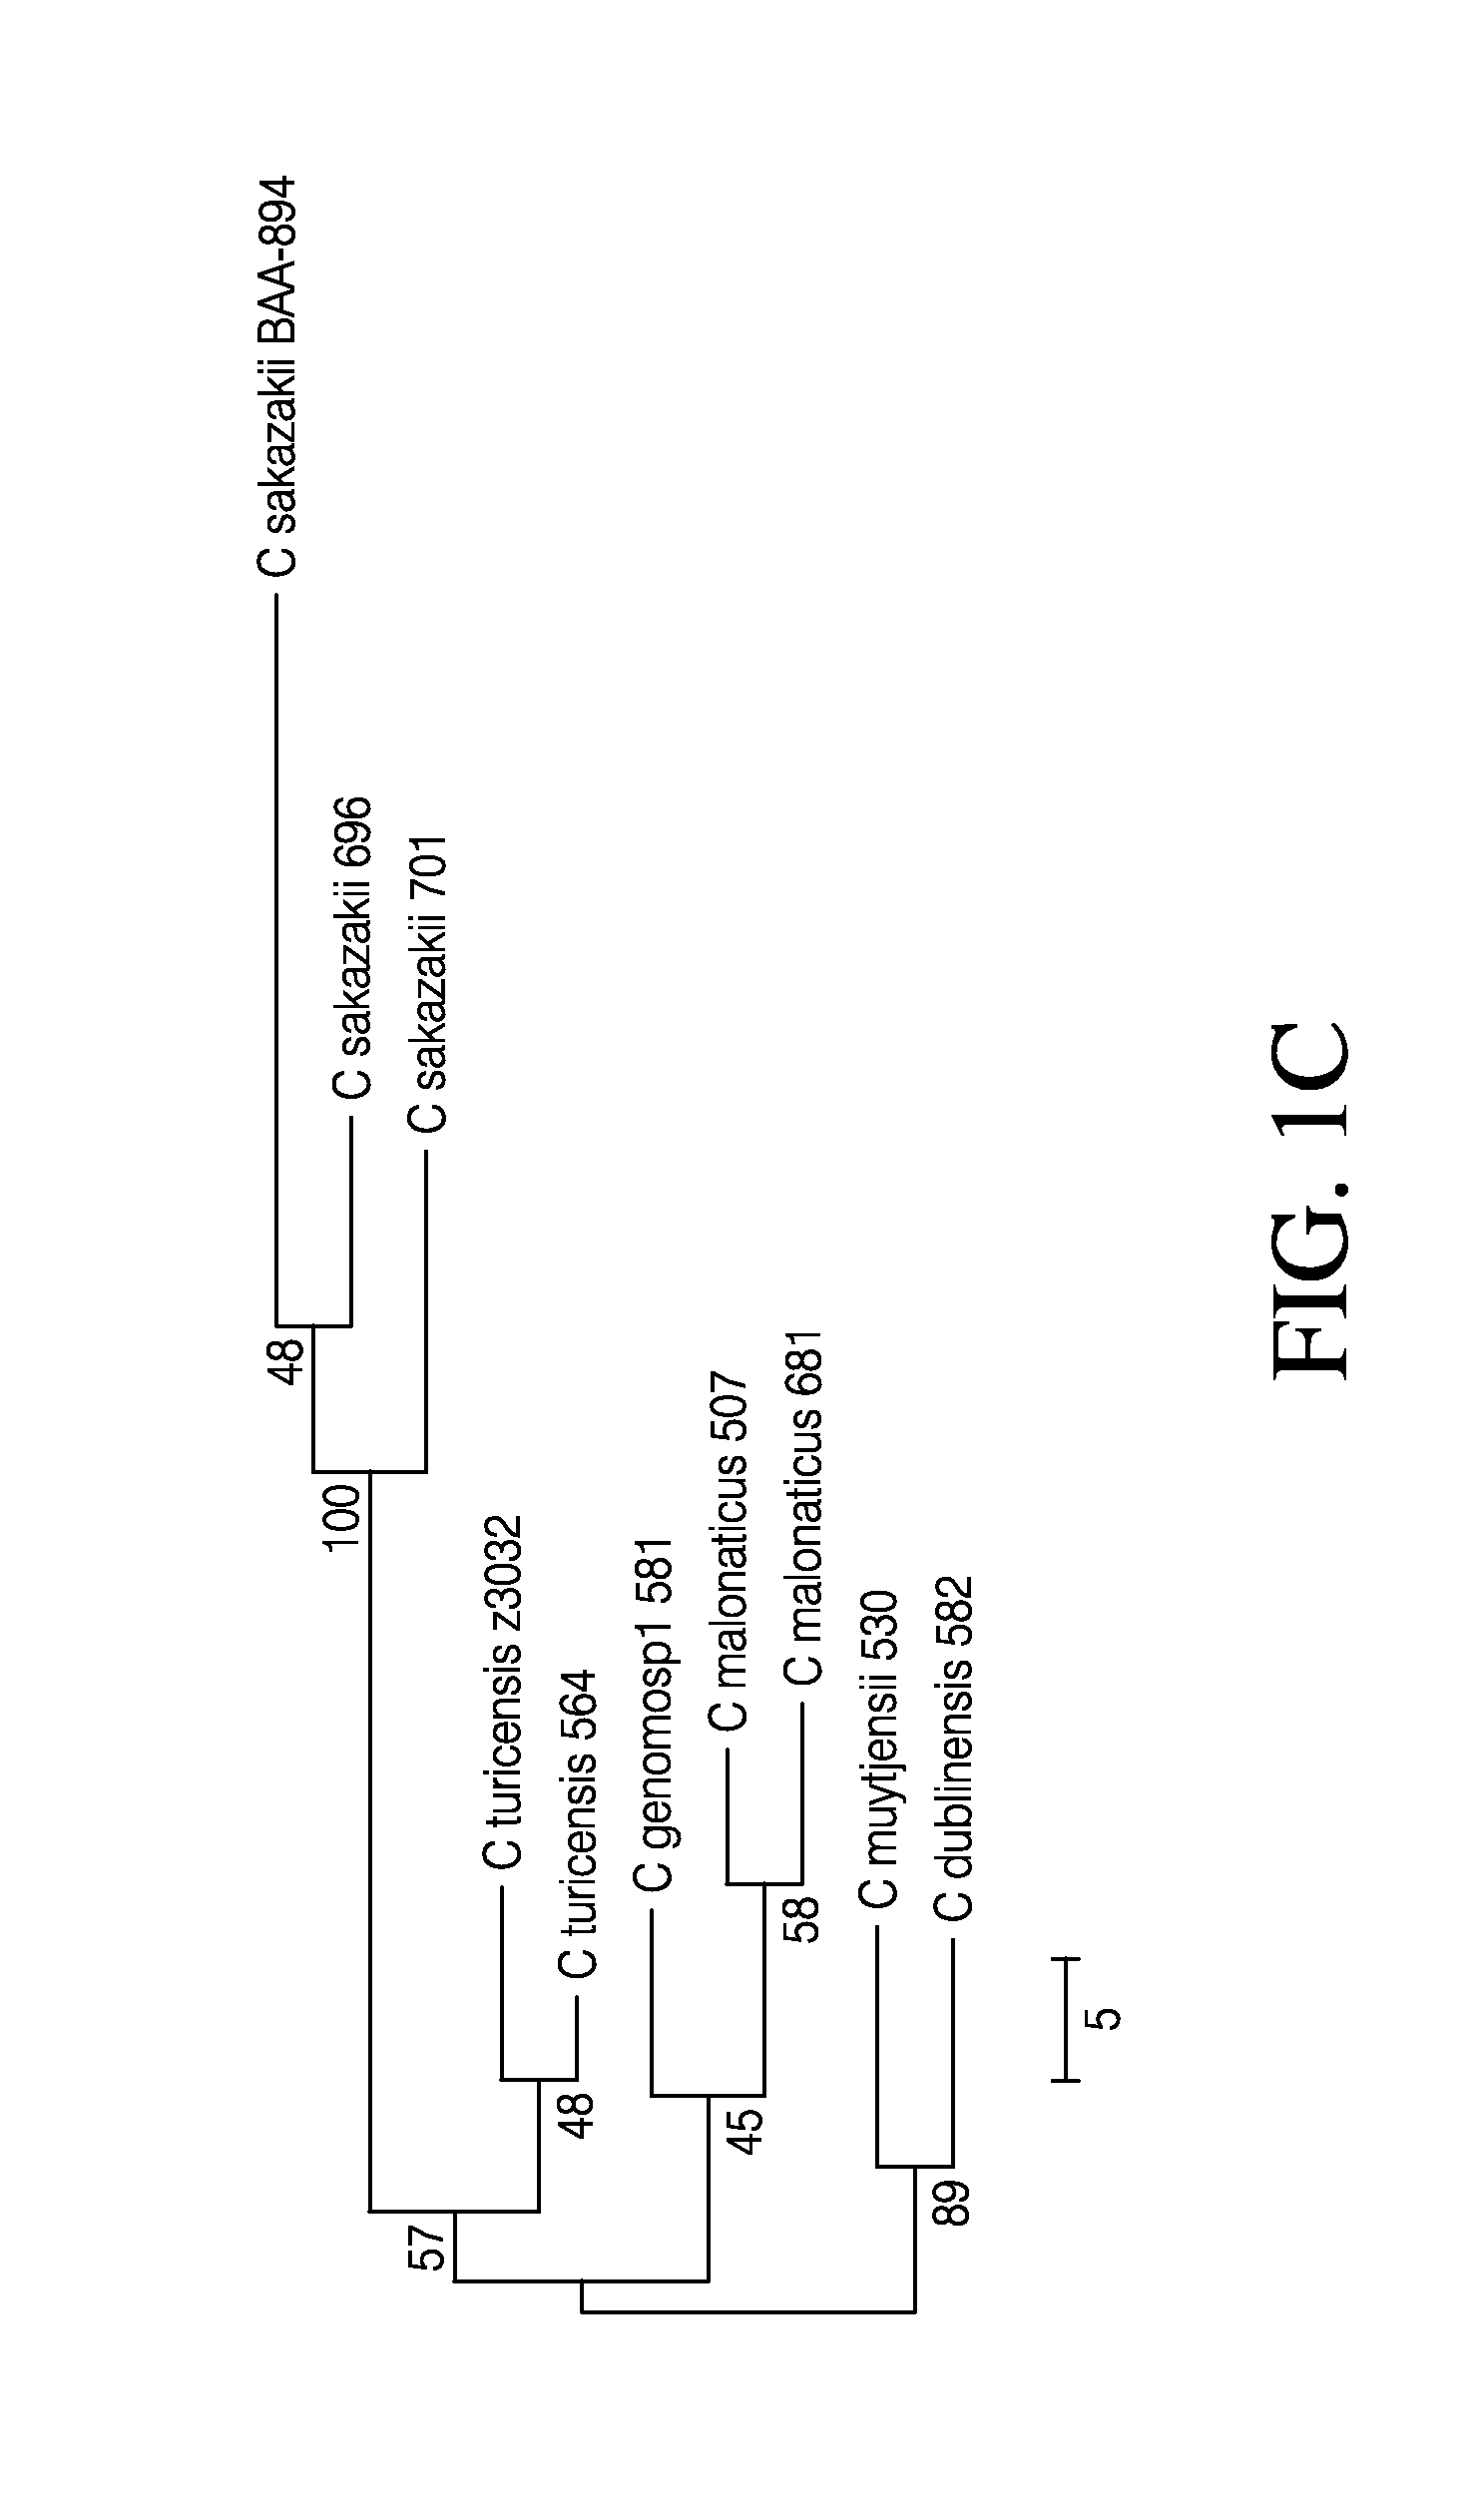 Compositions and methods for detection of cronobacter spp. and cronobacter species and strains